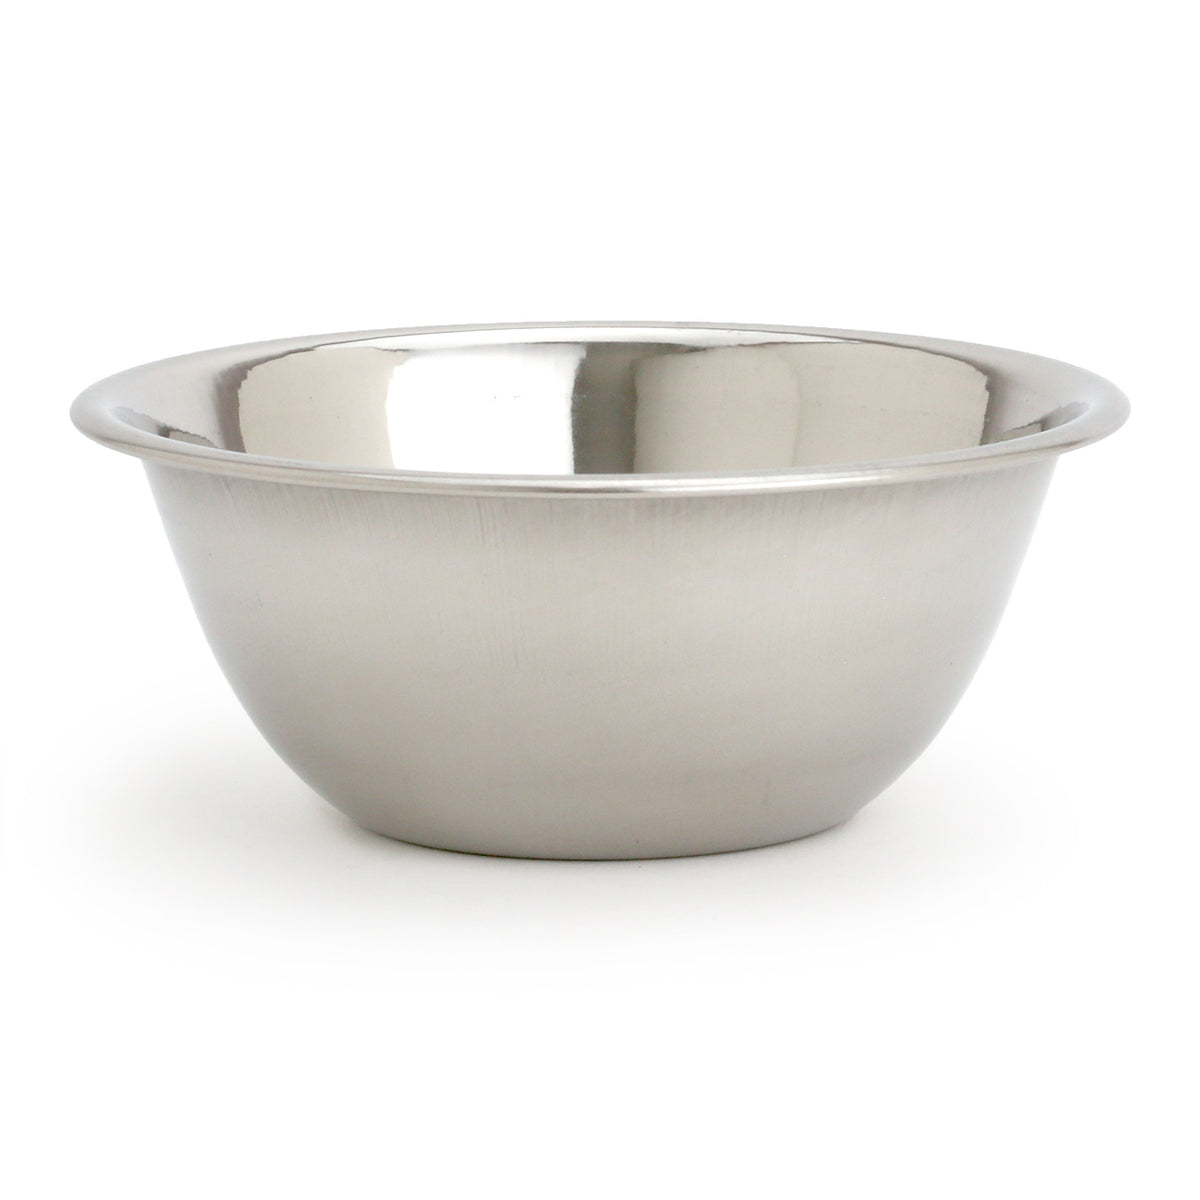 Small travel lather bowl side view